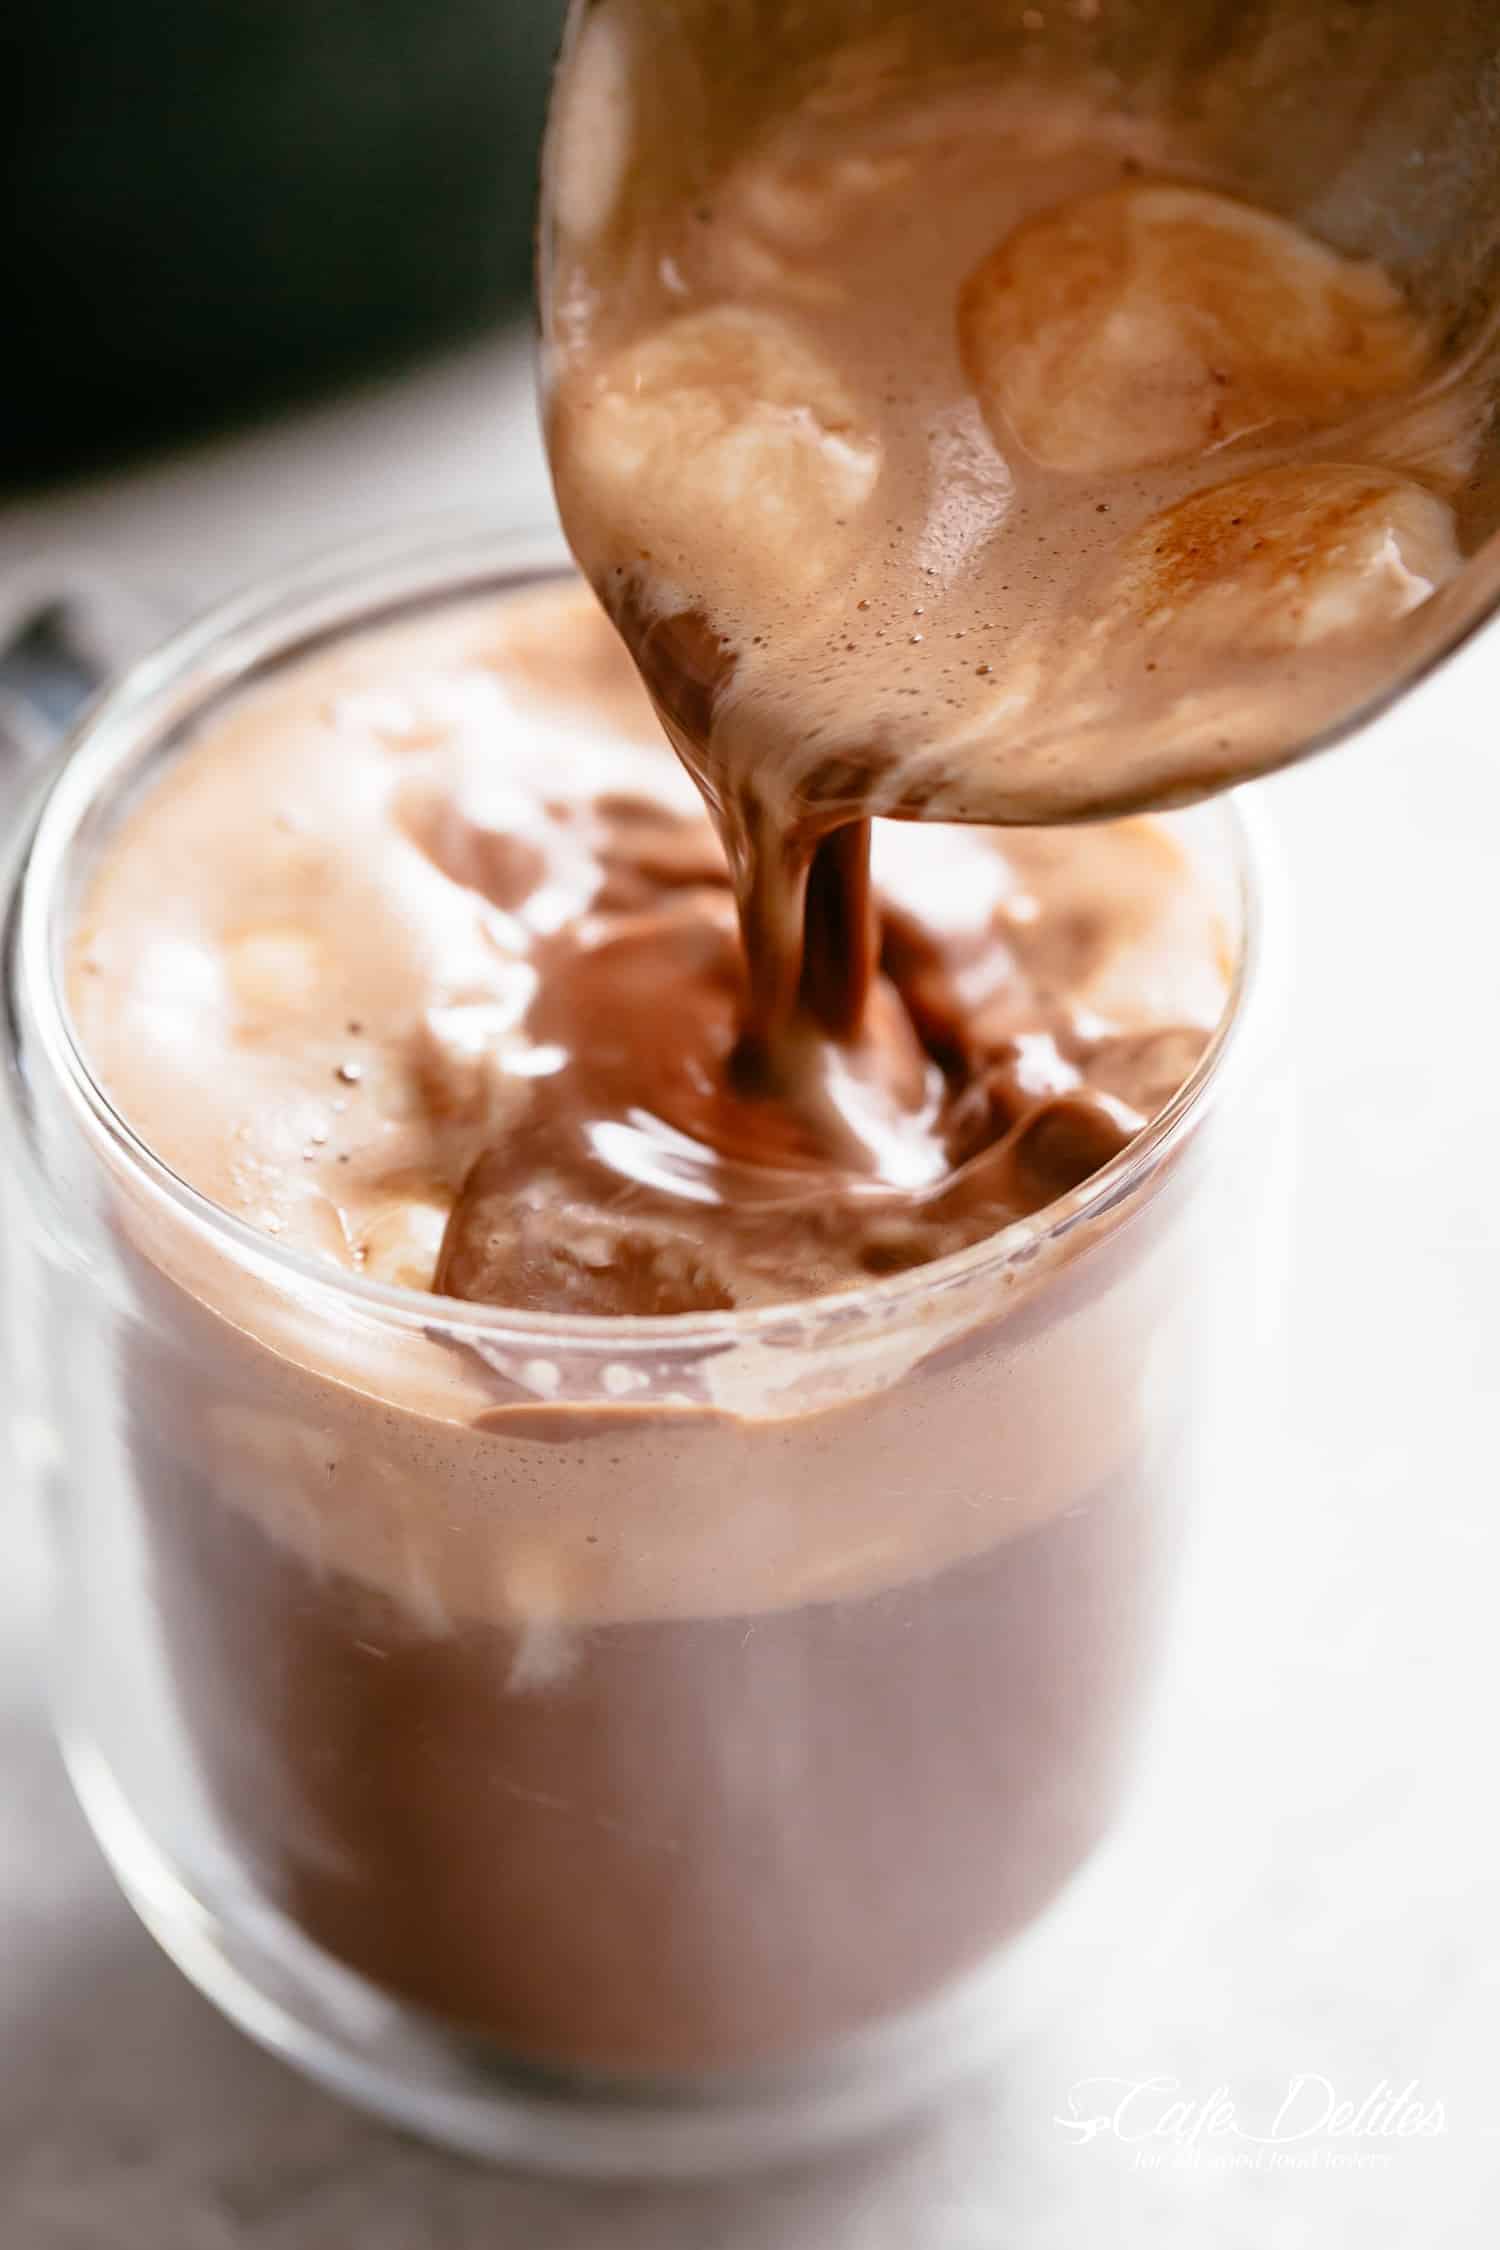 Creamy and decadent Hot Chocolate made easy in a slow cooker with a secret ingredient to m Slow Cooker Hot Chocolate